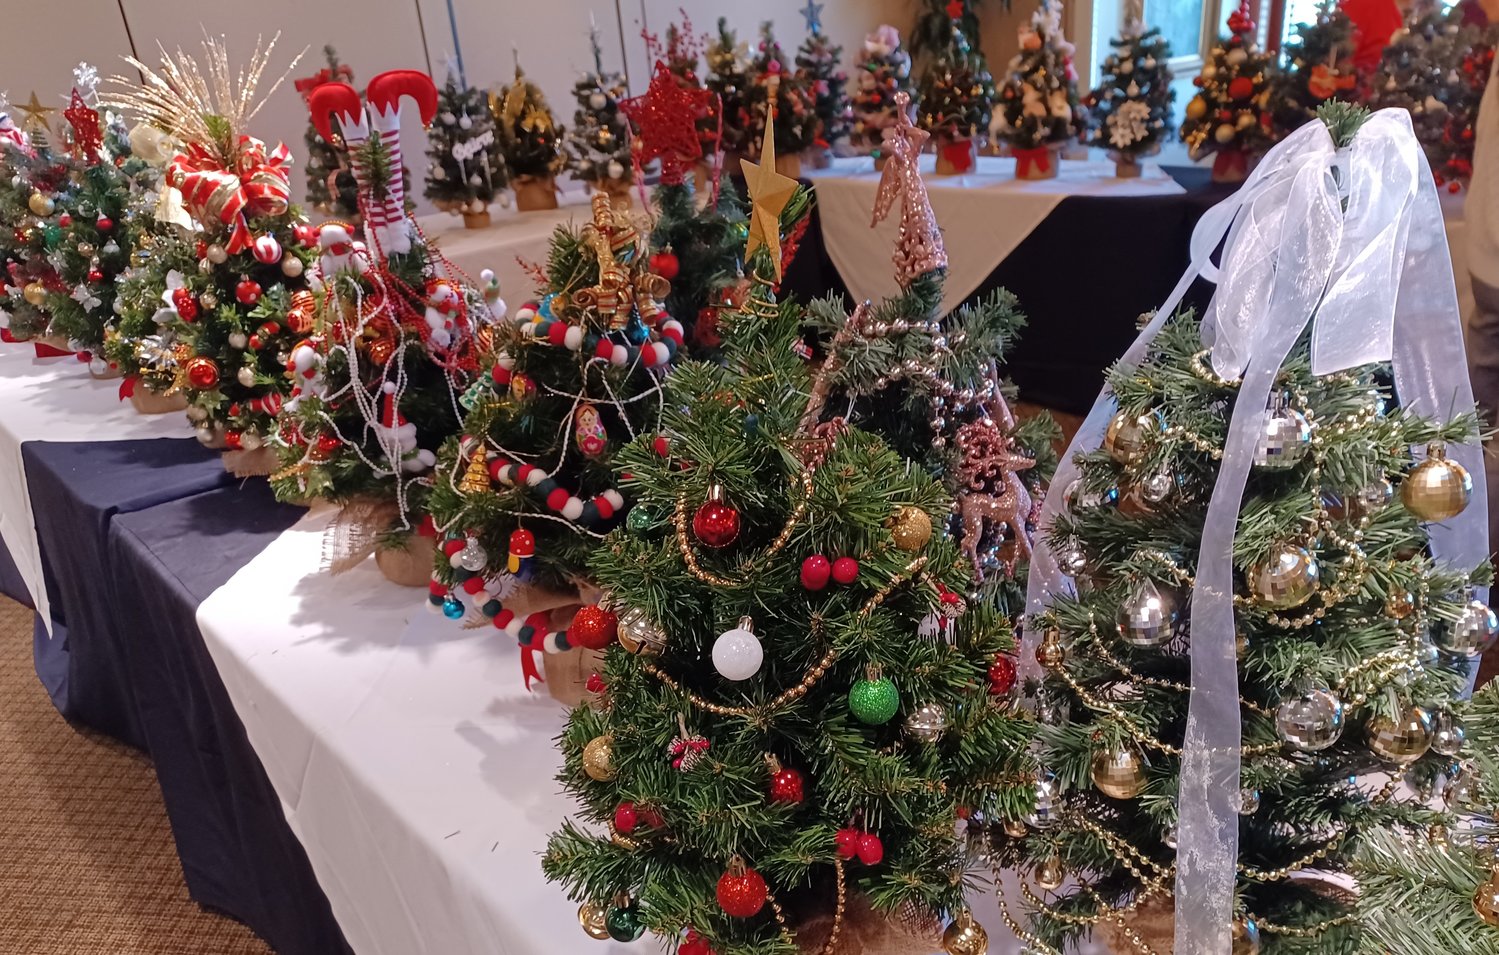 Volunteers decorate trees for hospice patients